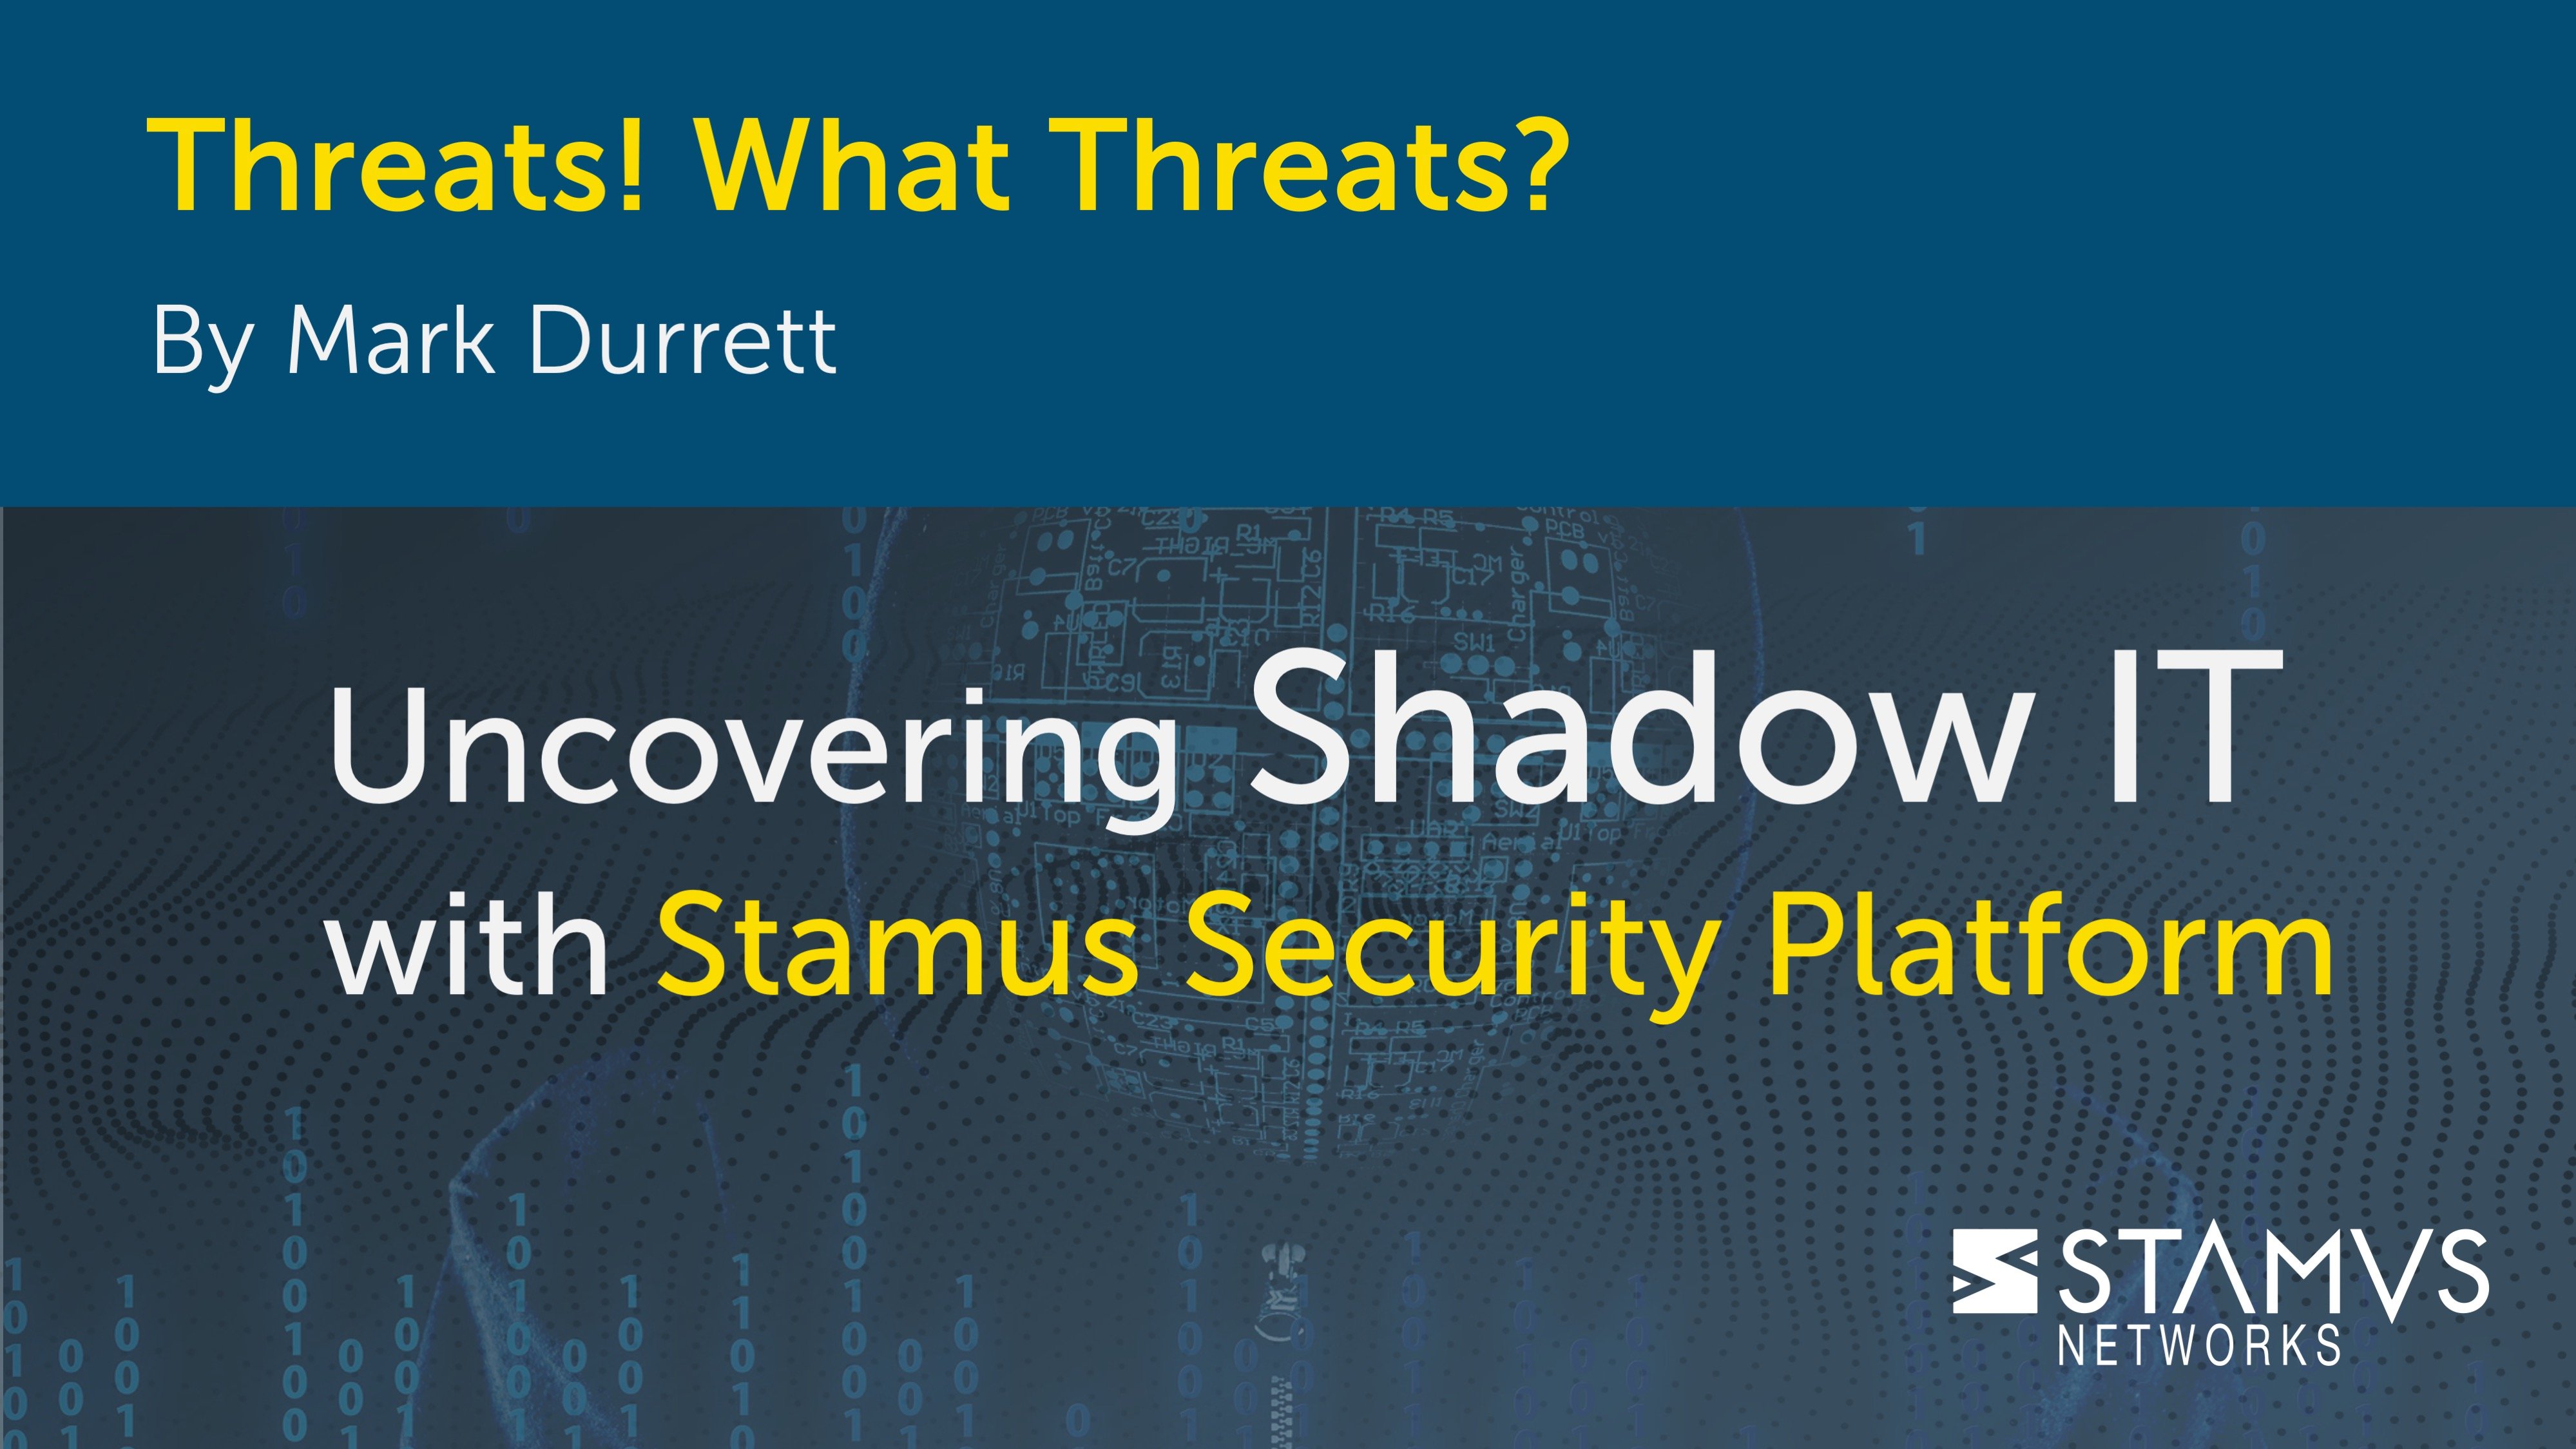 Uncovering Shadow IT with Stamus Security Platform